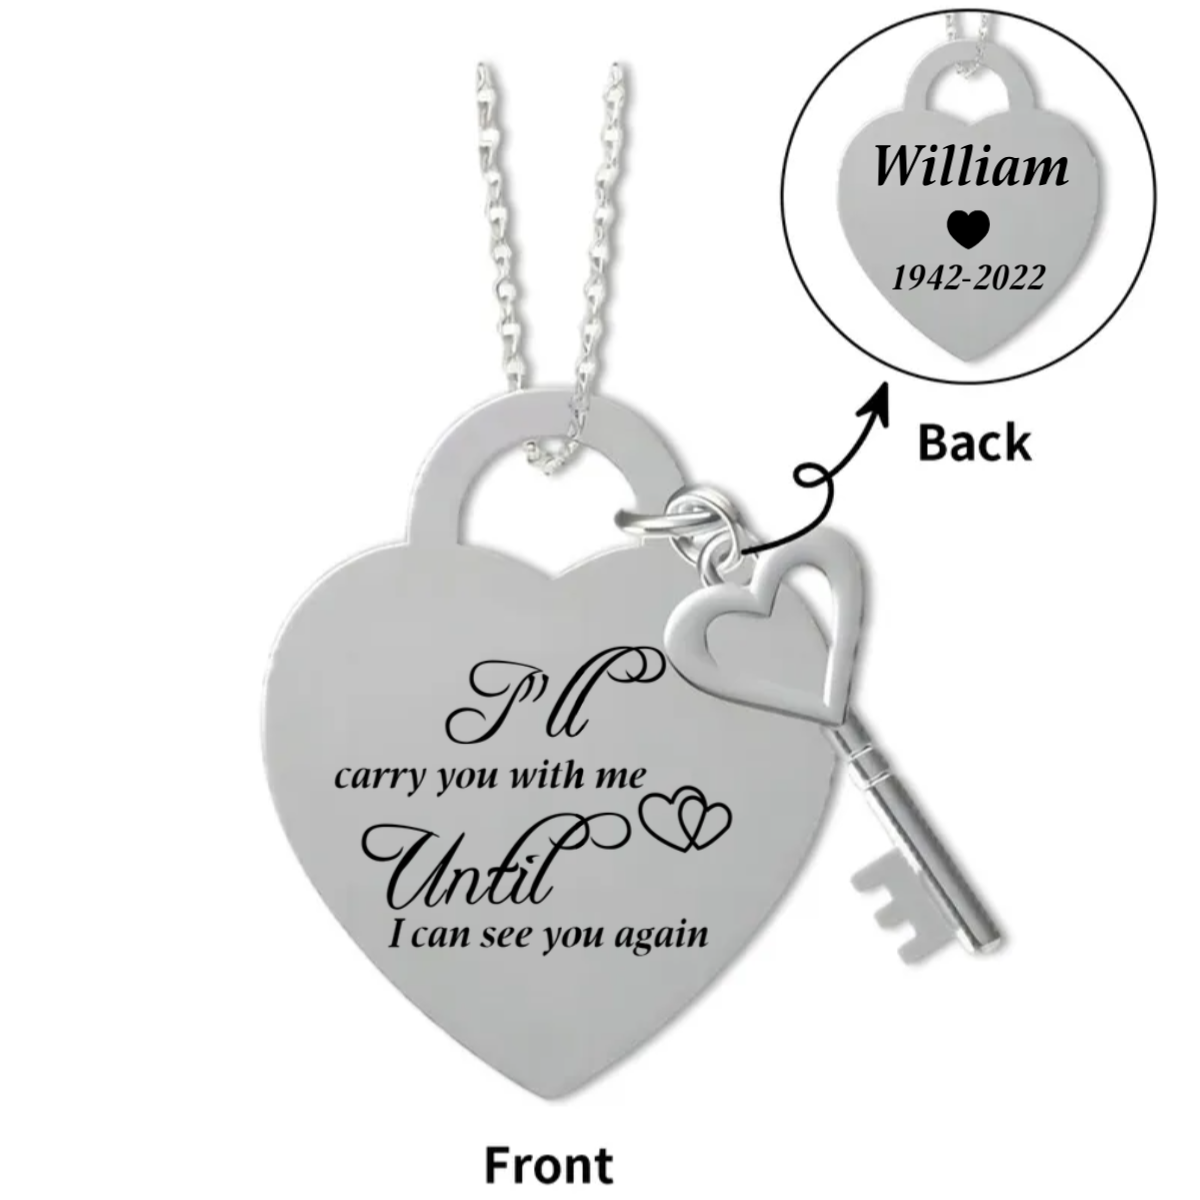 Personalized Memorial Heart Necklace With Heart Key